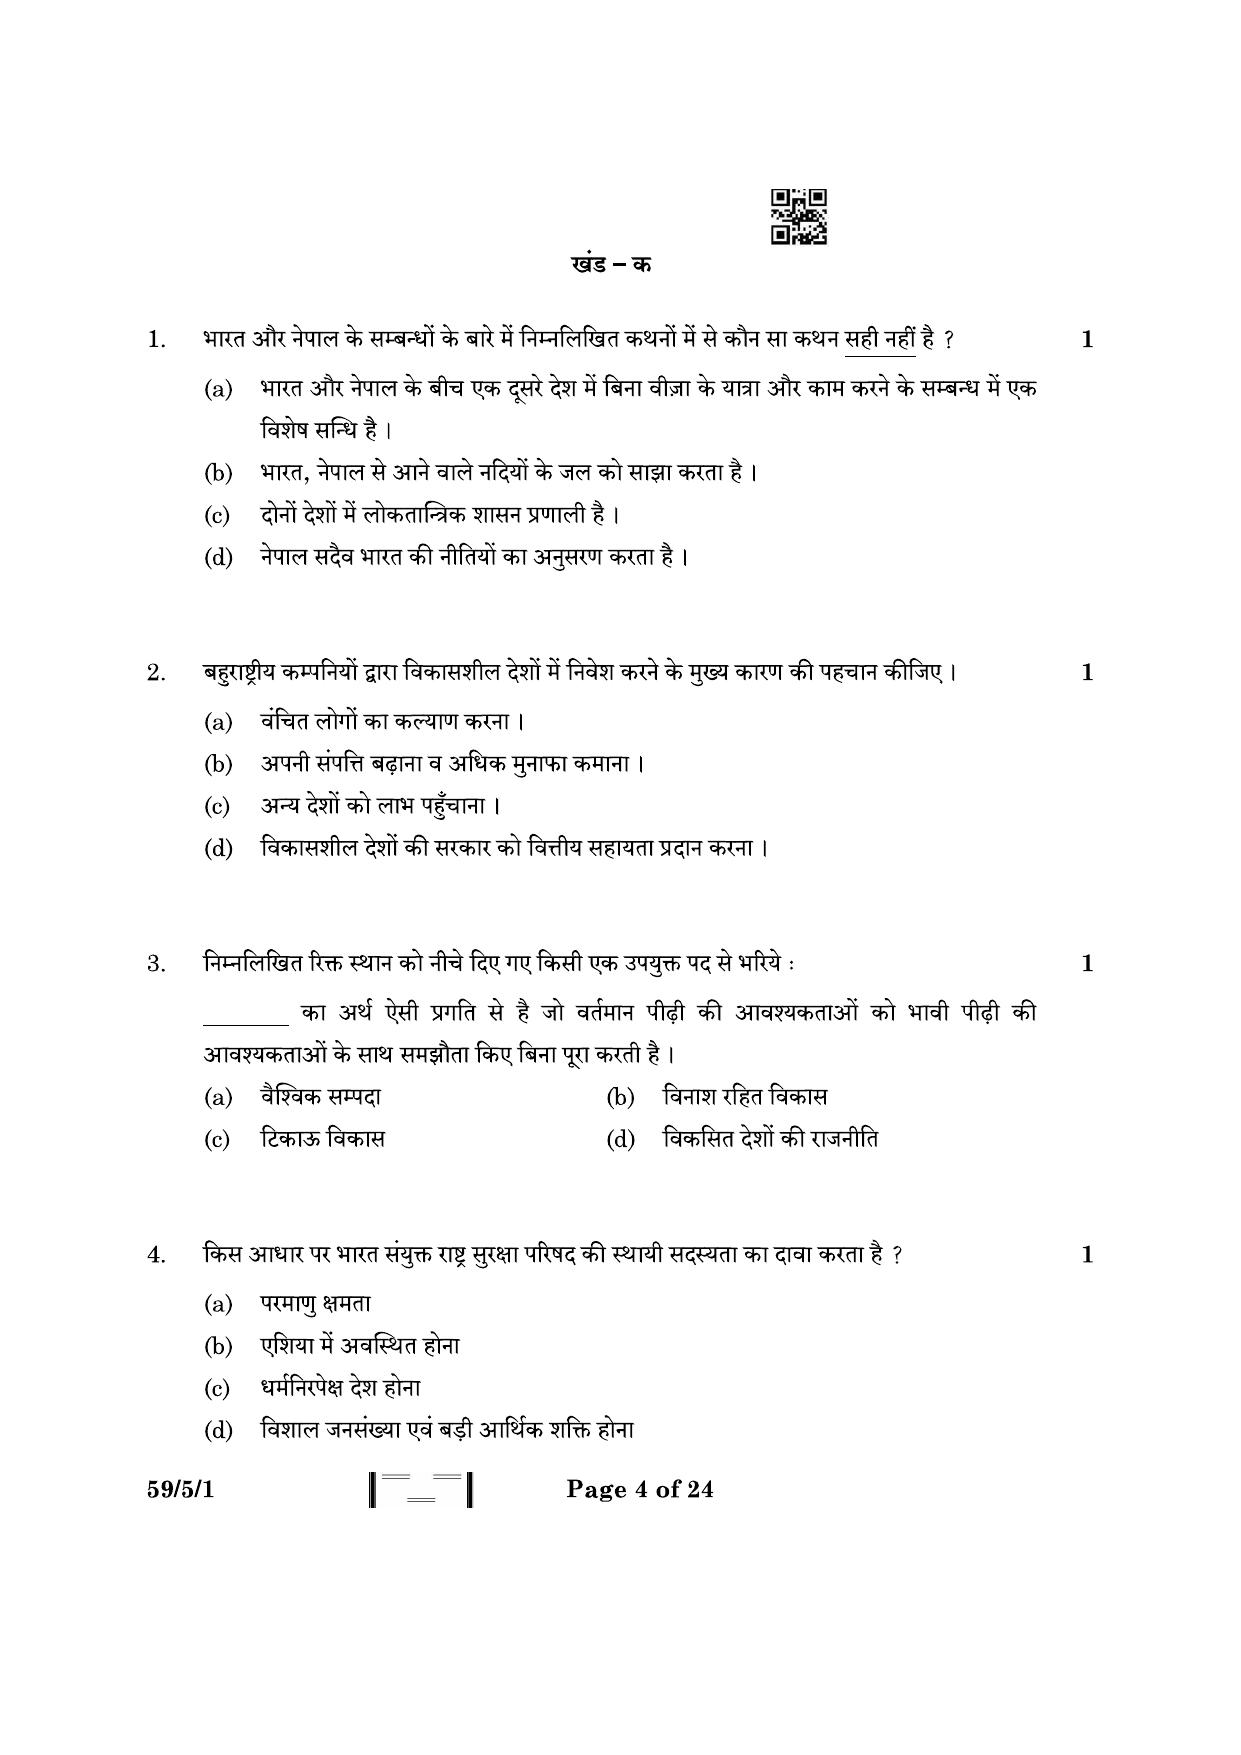 CBSE Class 12 59-5-1 Political Science 2023 Question Paper - Page 4